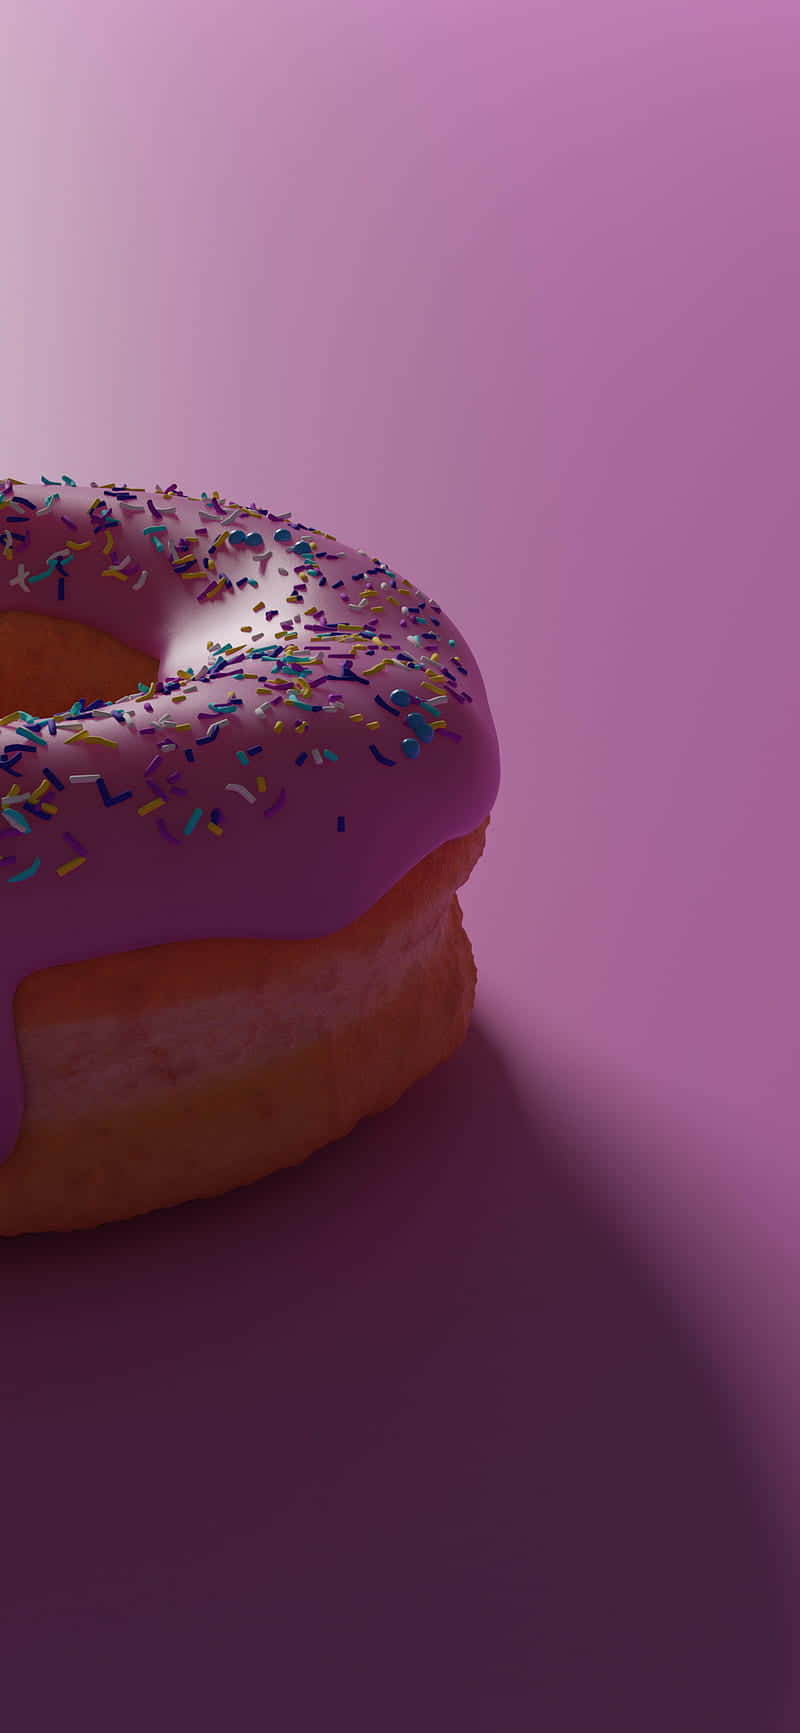 Adorable Pink Donut with Colorful Sprinkles Wallpaper